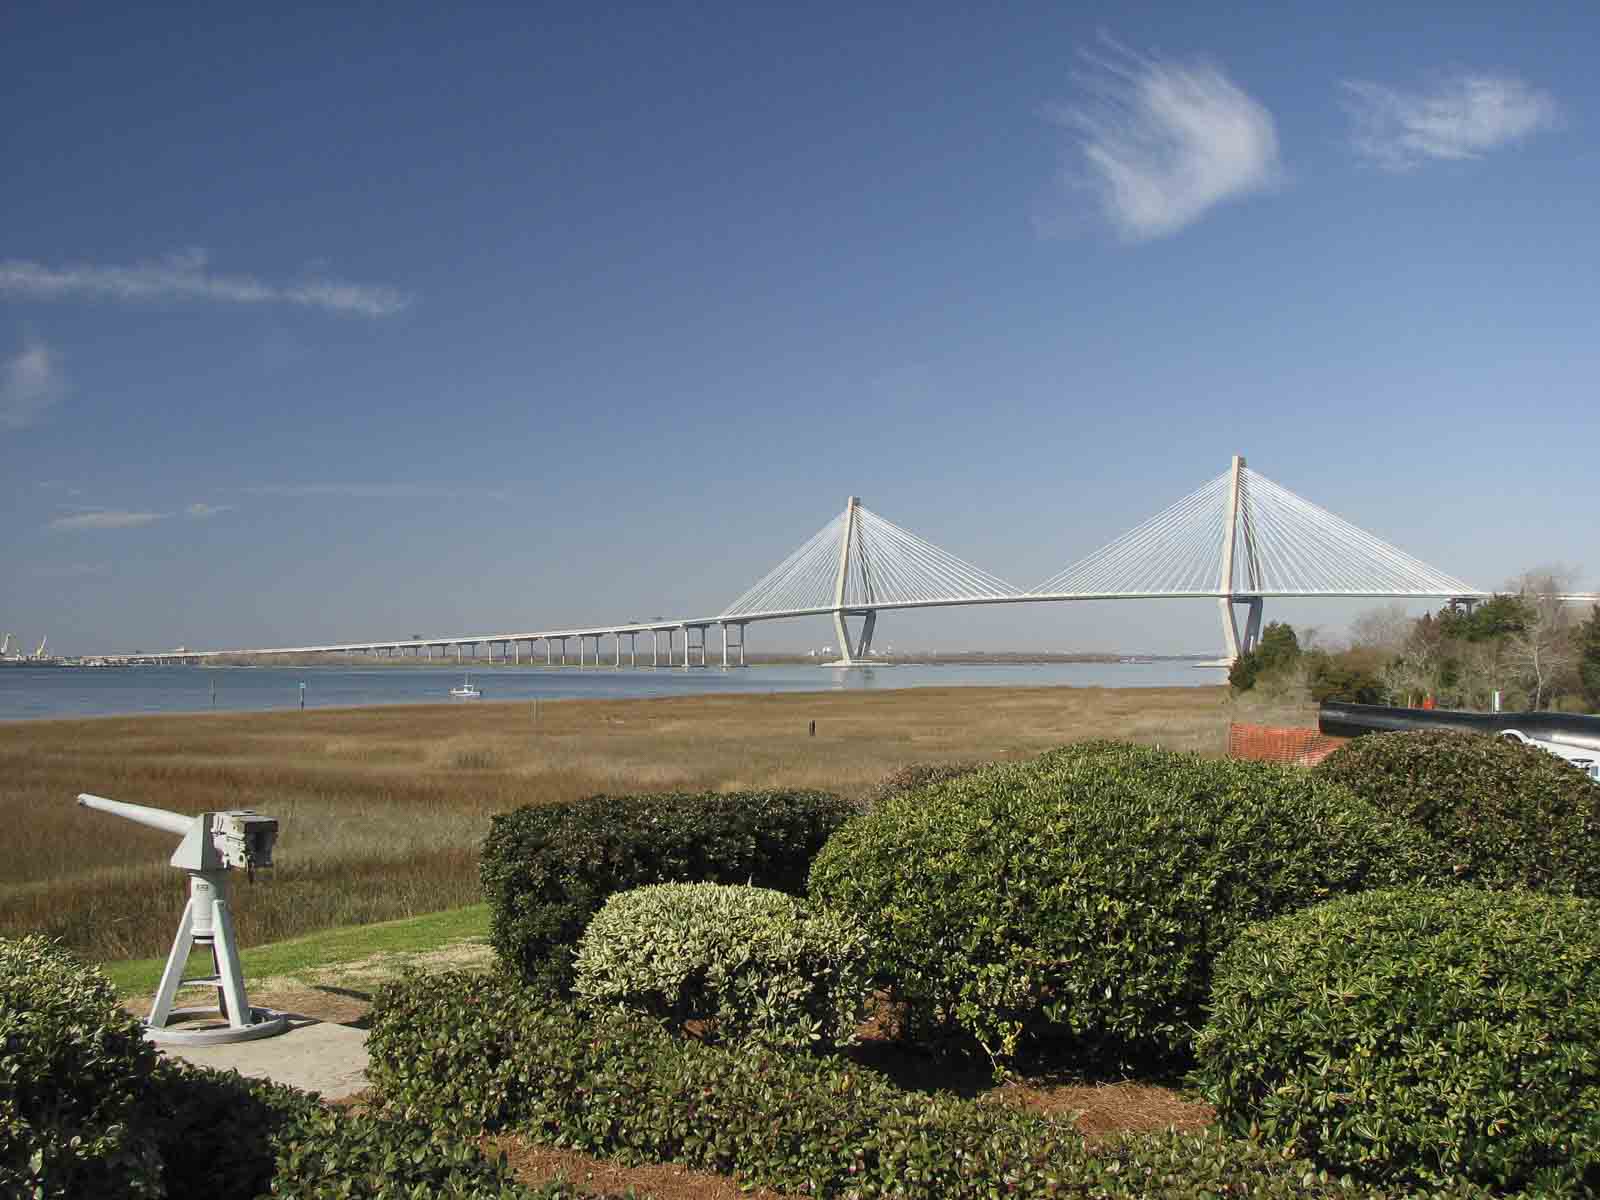 The Cable Bridge Above The River - Patriots Point Foundation